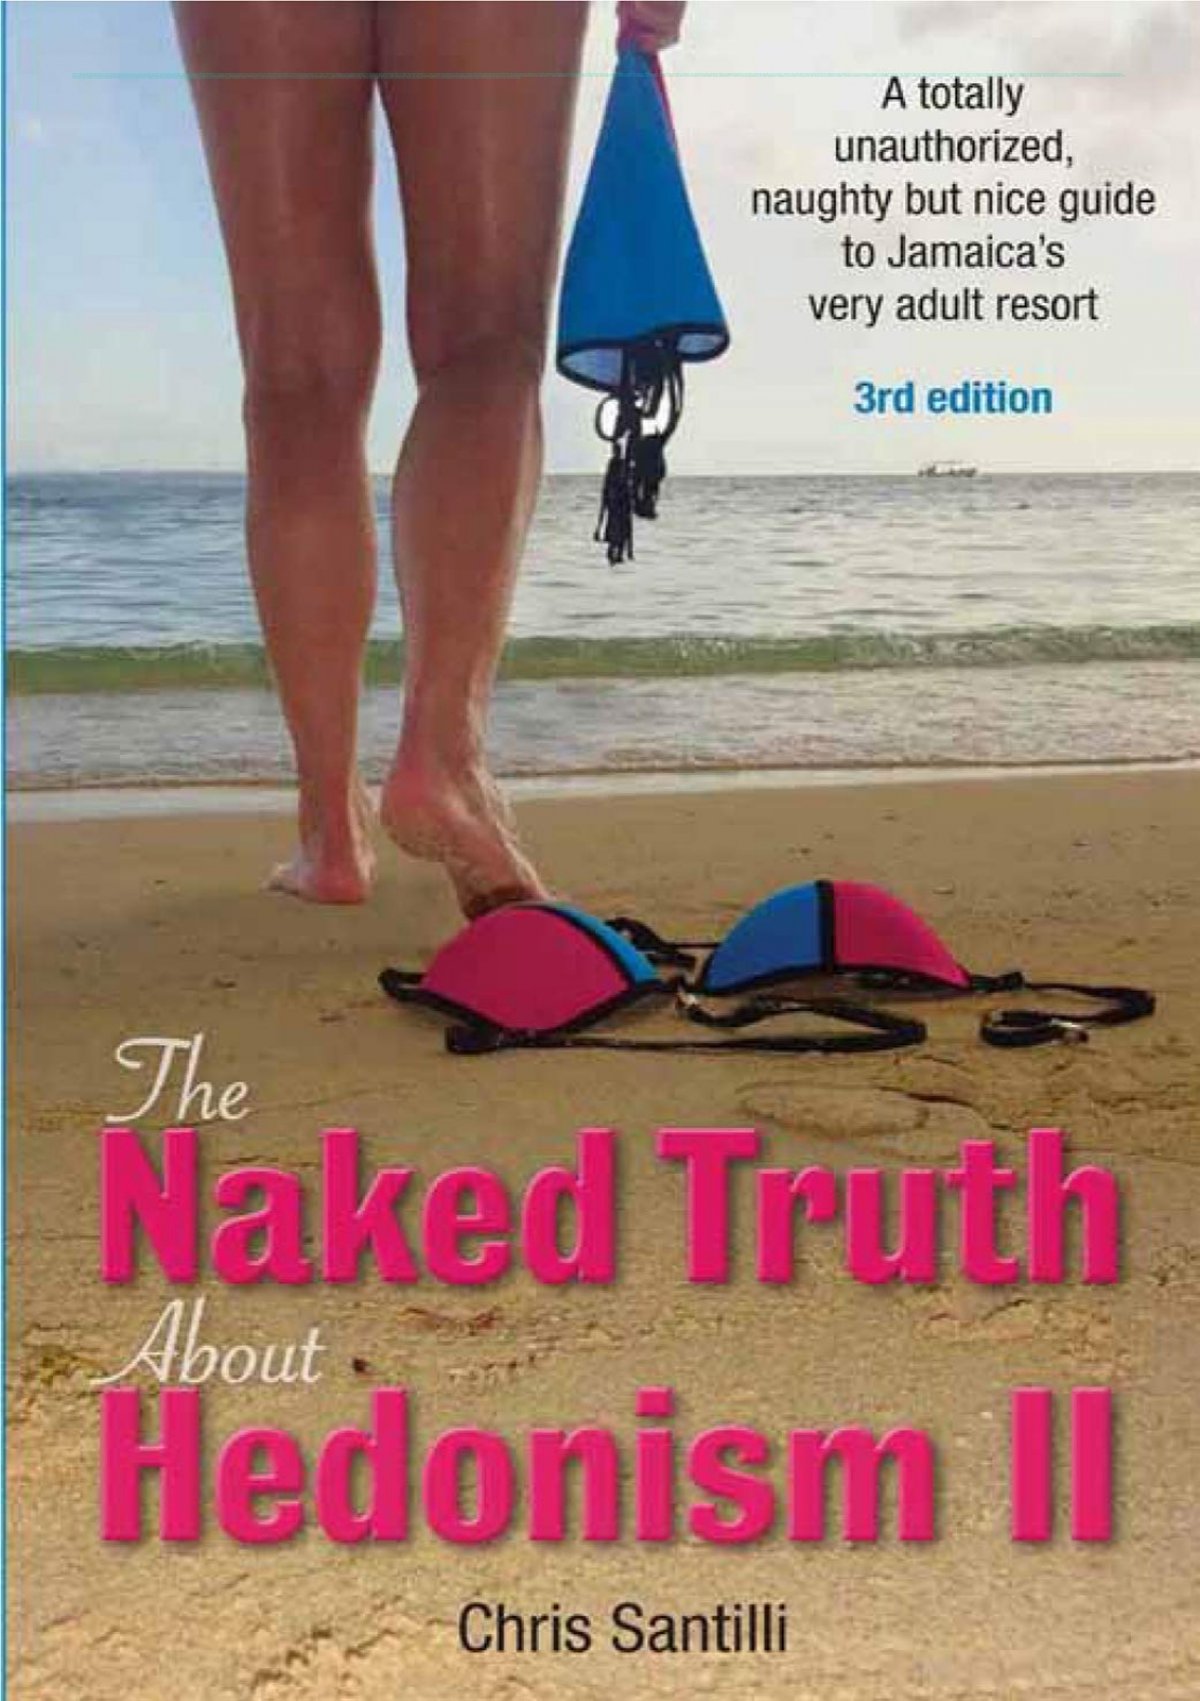 Pdf The Naked Truth About Hedonism Ii A Totally Unauthorized Naughty But Nice Guide To Jamaica